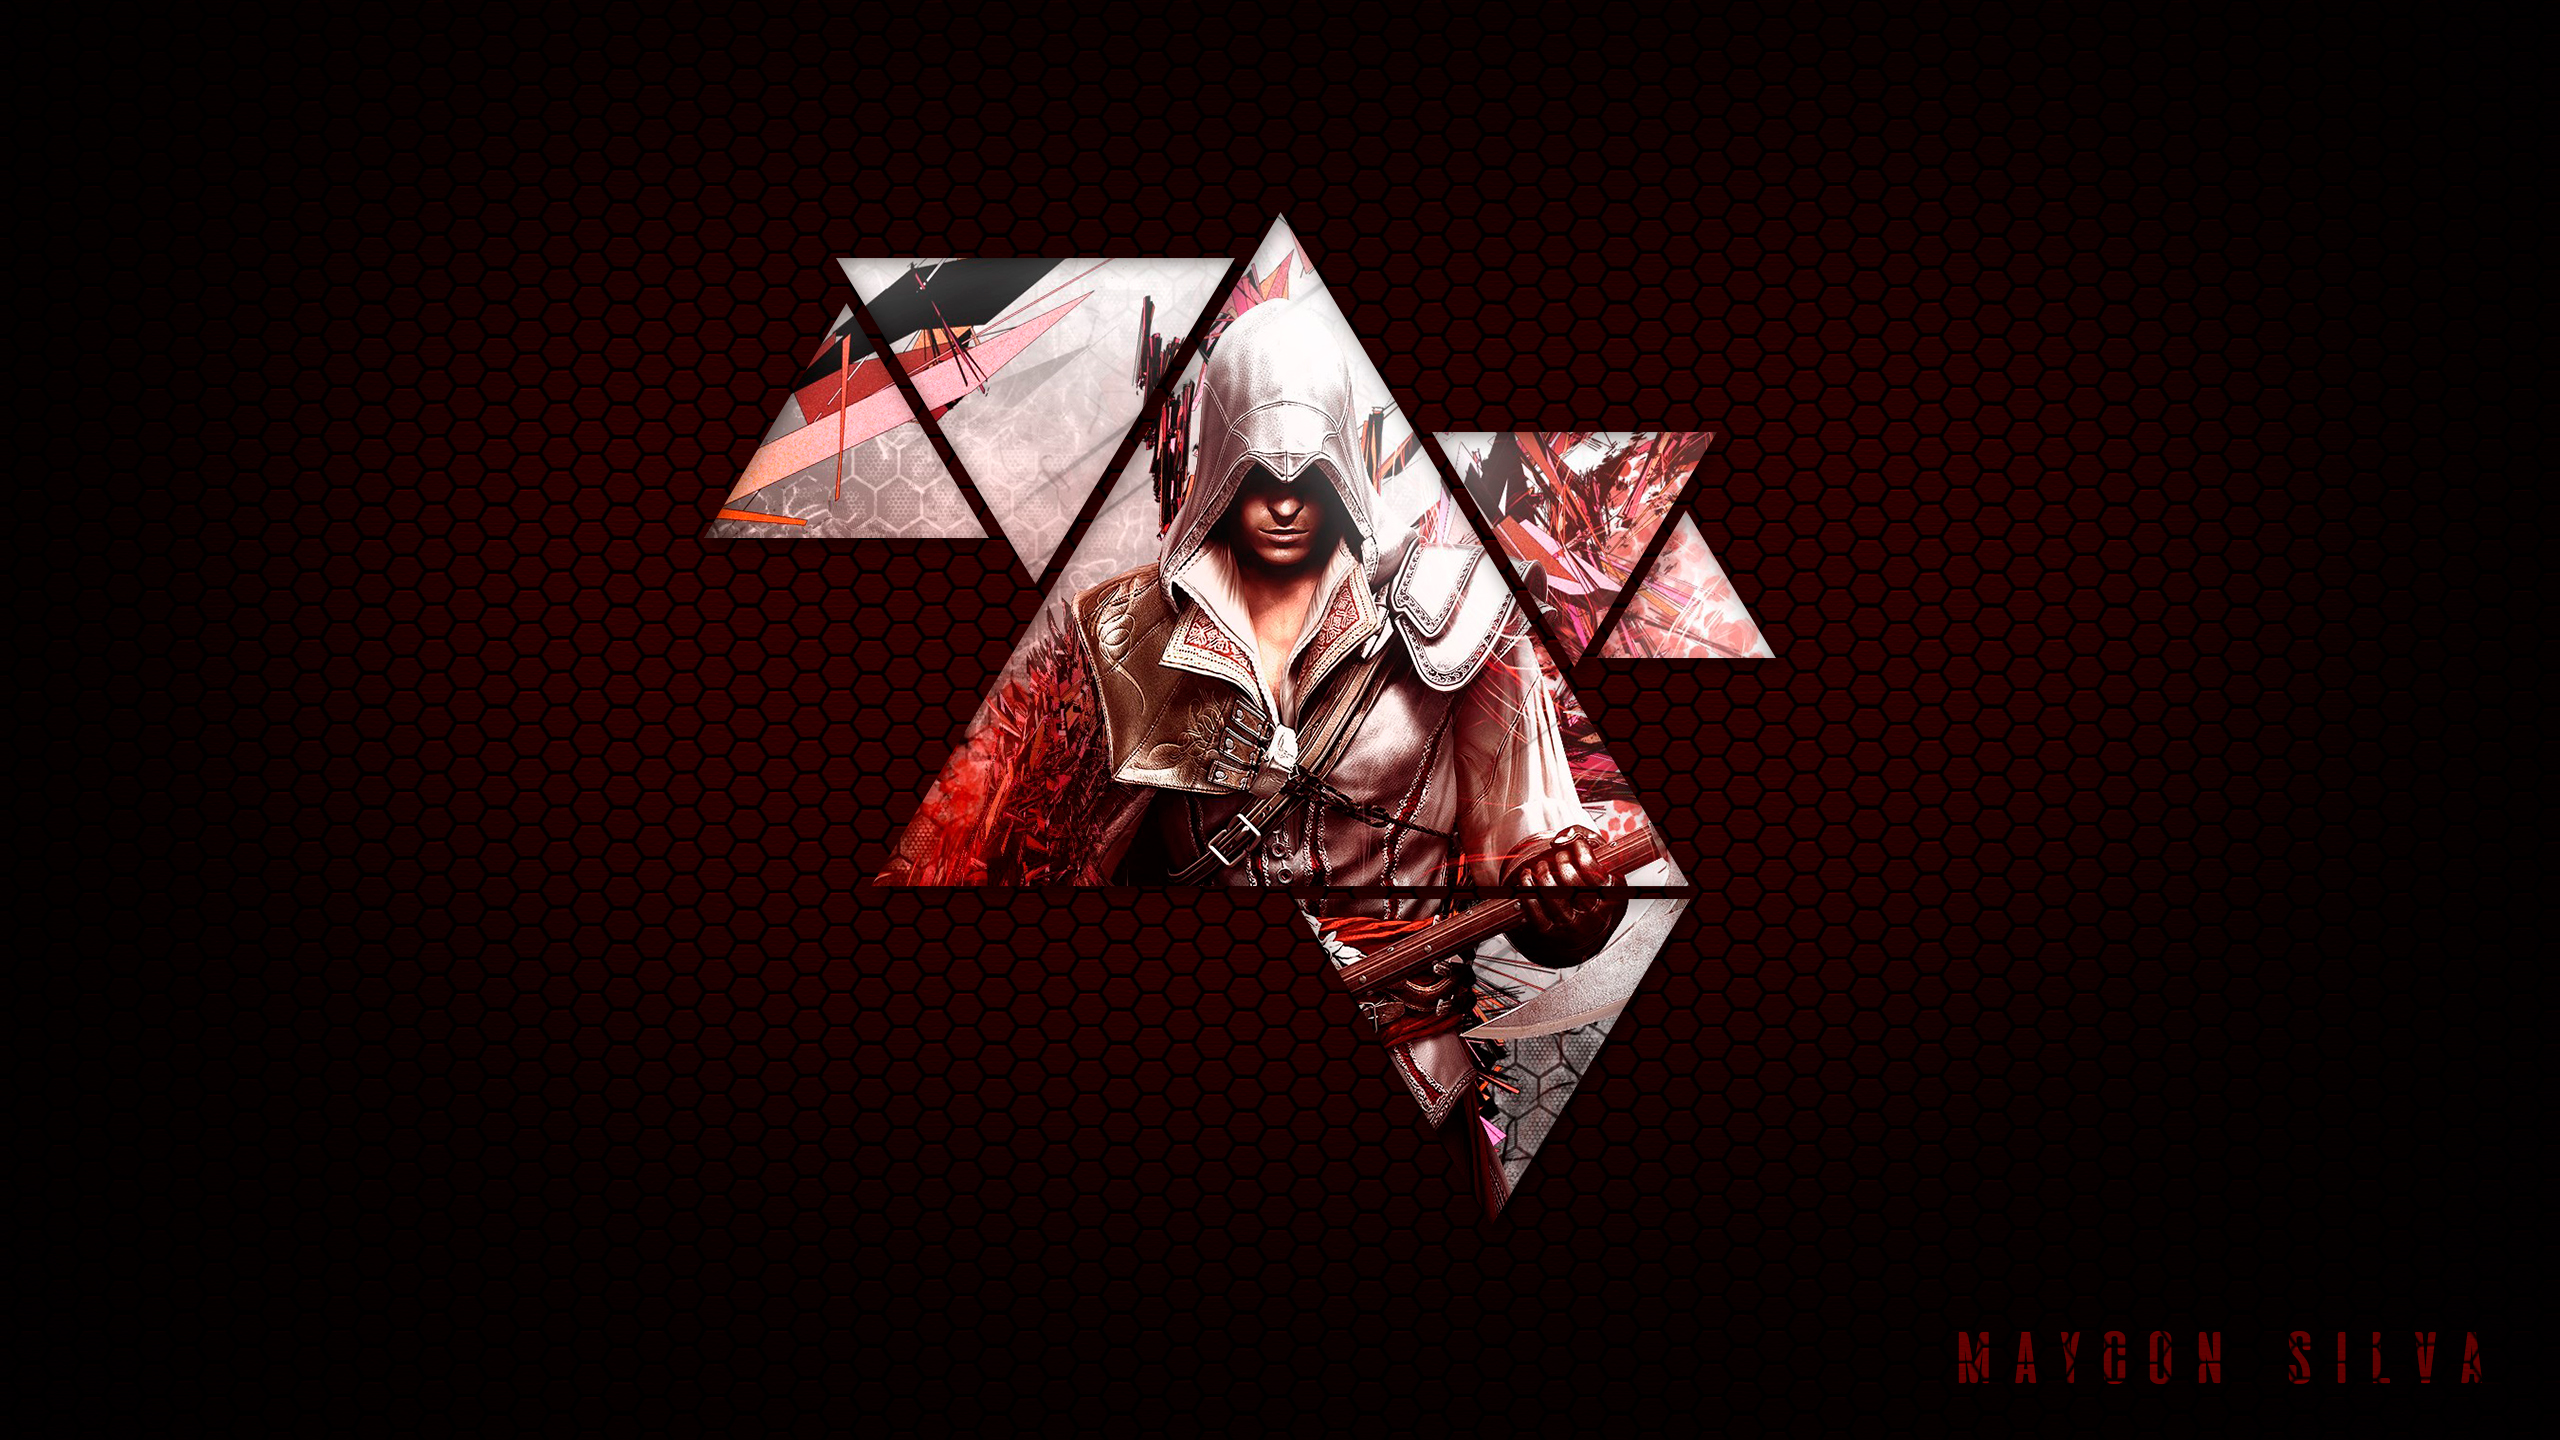 General 2560x1440 Assassin's Creed red Assassin's Creed II video games video game characters Ubisoft Ezio Auditore da Firenze